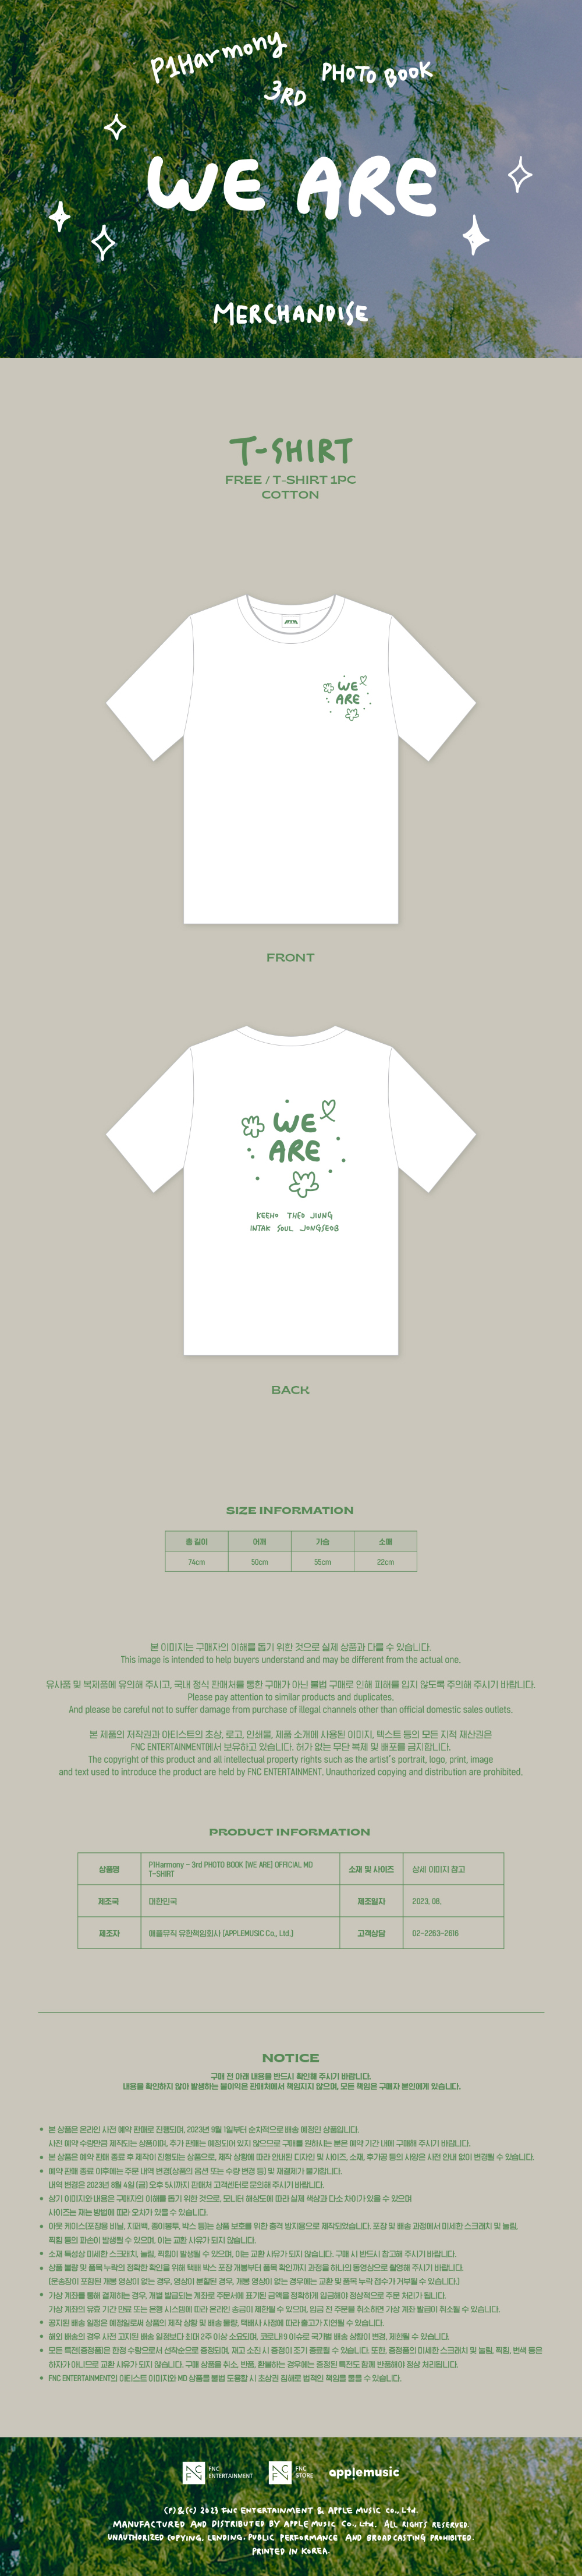 P1Harmony - 3rd PHOTO BOOK [WE ARE] _ T-SHIRT